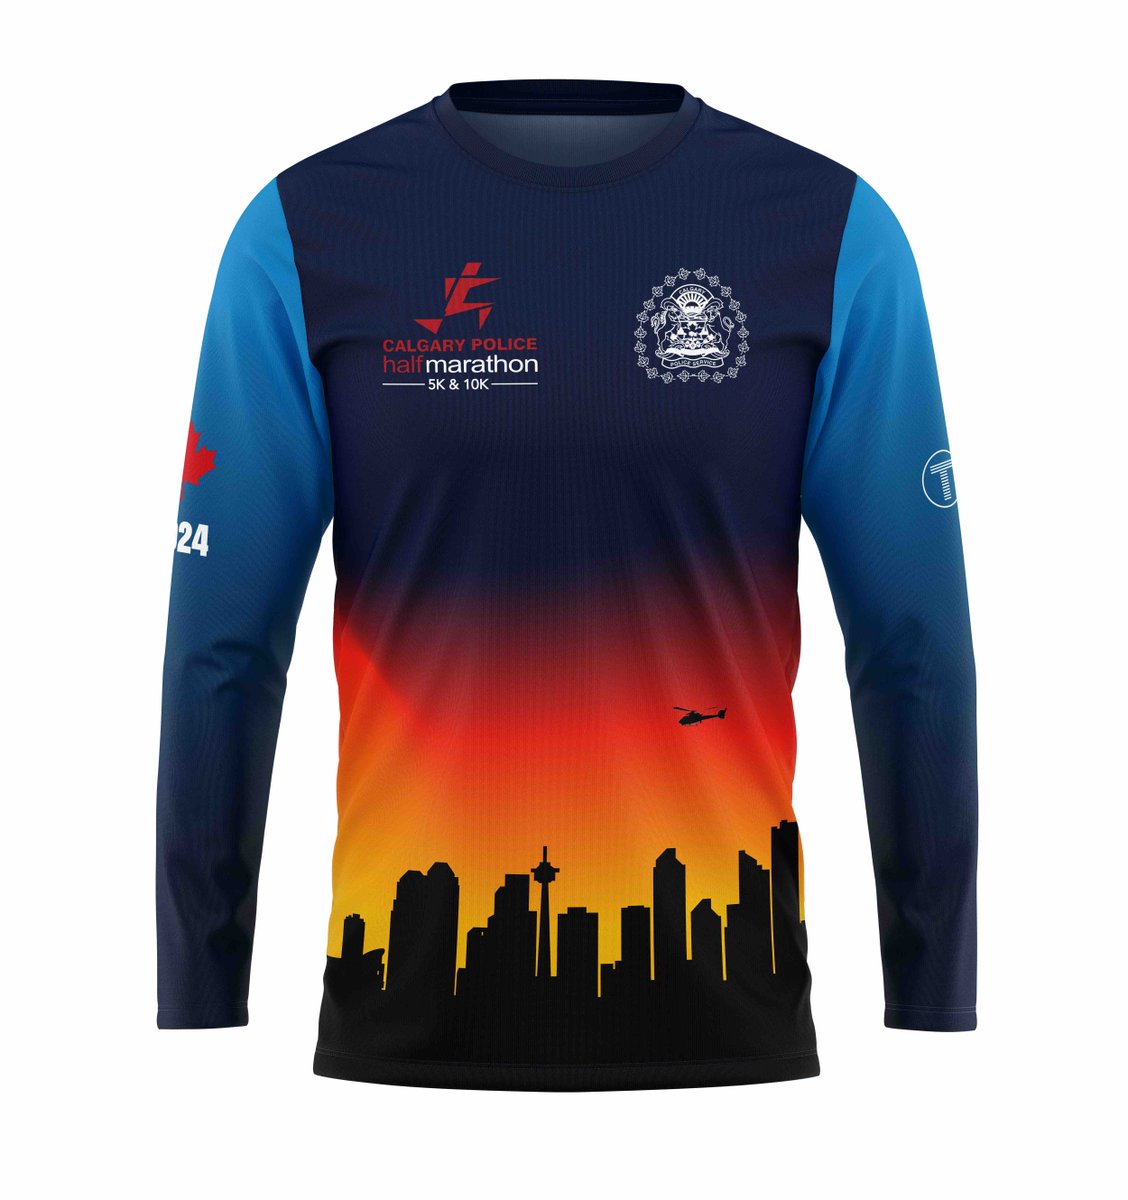 🎆 2024 RACE SHIRT! 🎆 Every registration comes with one of these awesome tunning shirts. Made of high-quality moisture-wicking material with long sleeves, these shirts are perfect for shoulder season sports activities! Register today to get yours! tinyurl.com/y42ztpzv